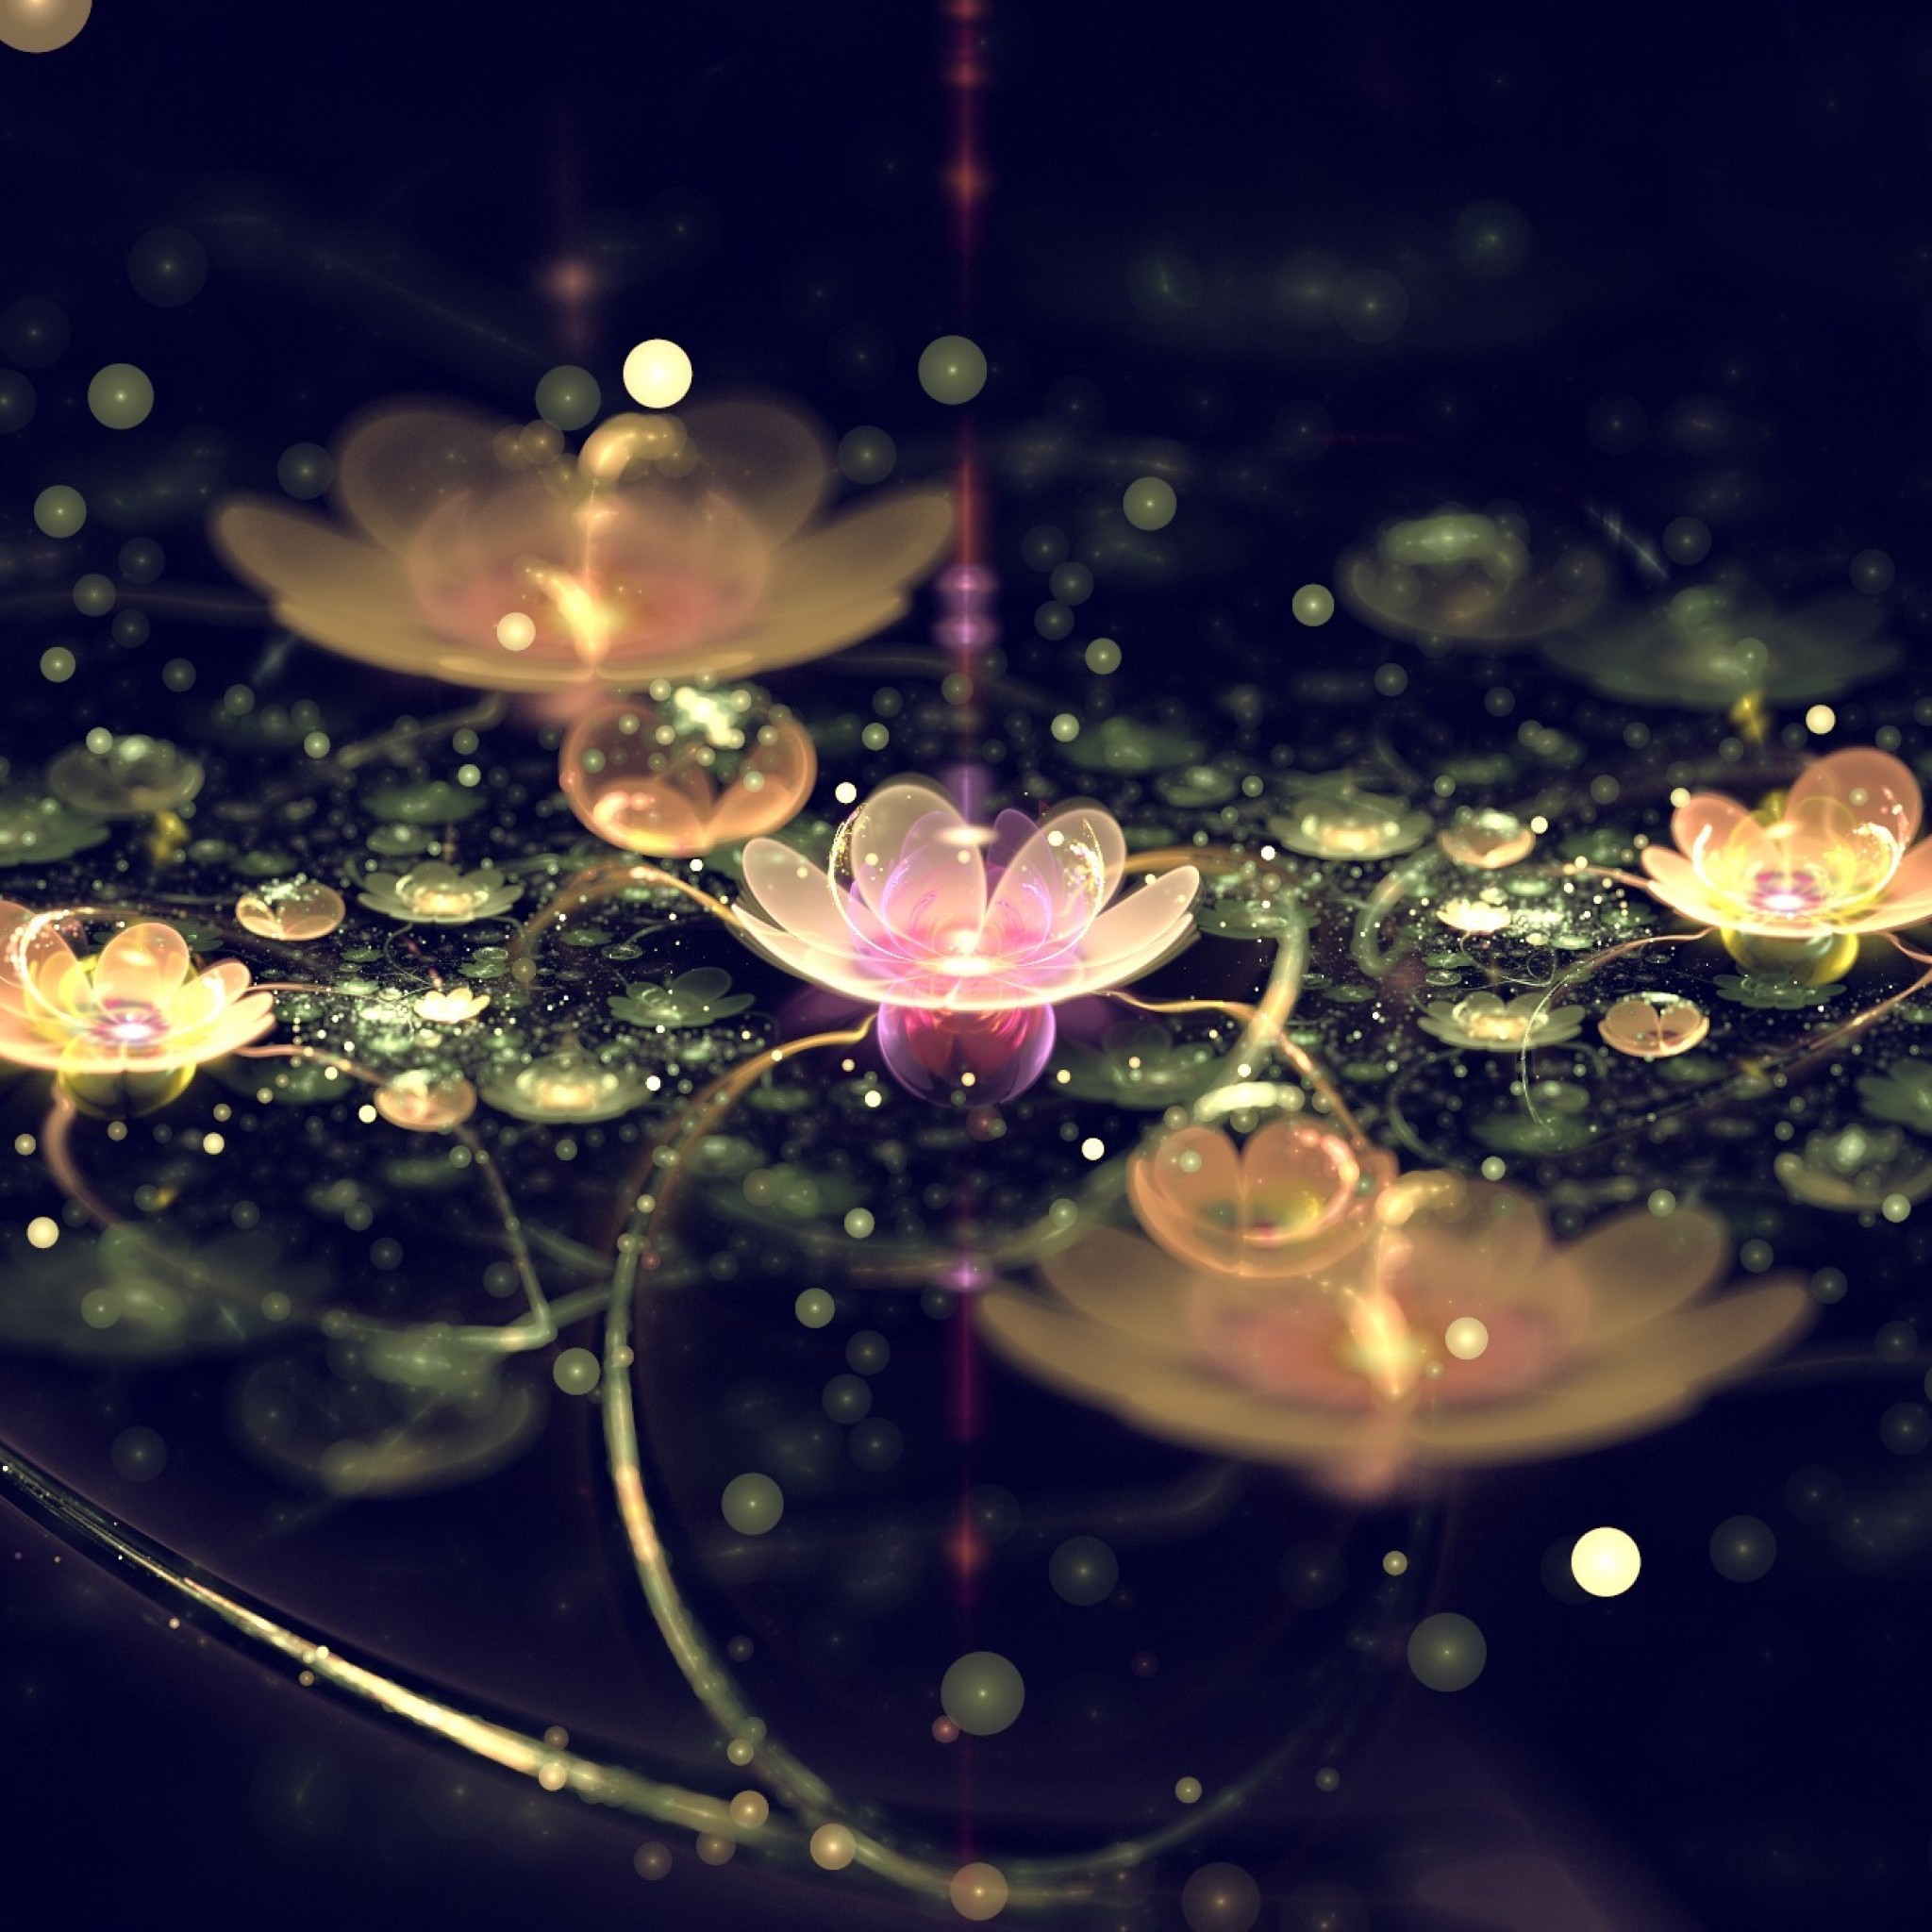 Wallpaper Art Flower Flowers Petals Abstraction The Lights Hd Wallpapers Ipad タブレット壁紙ギャラリー